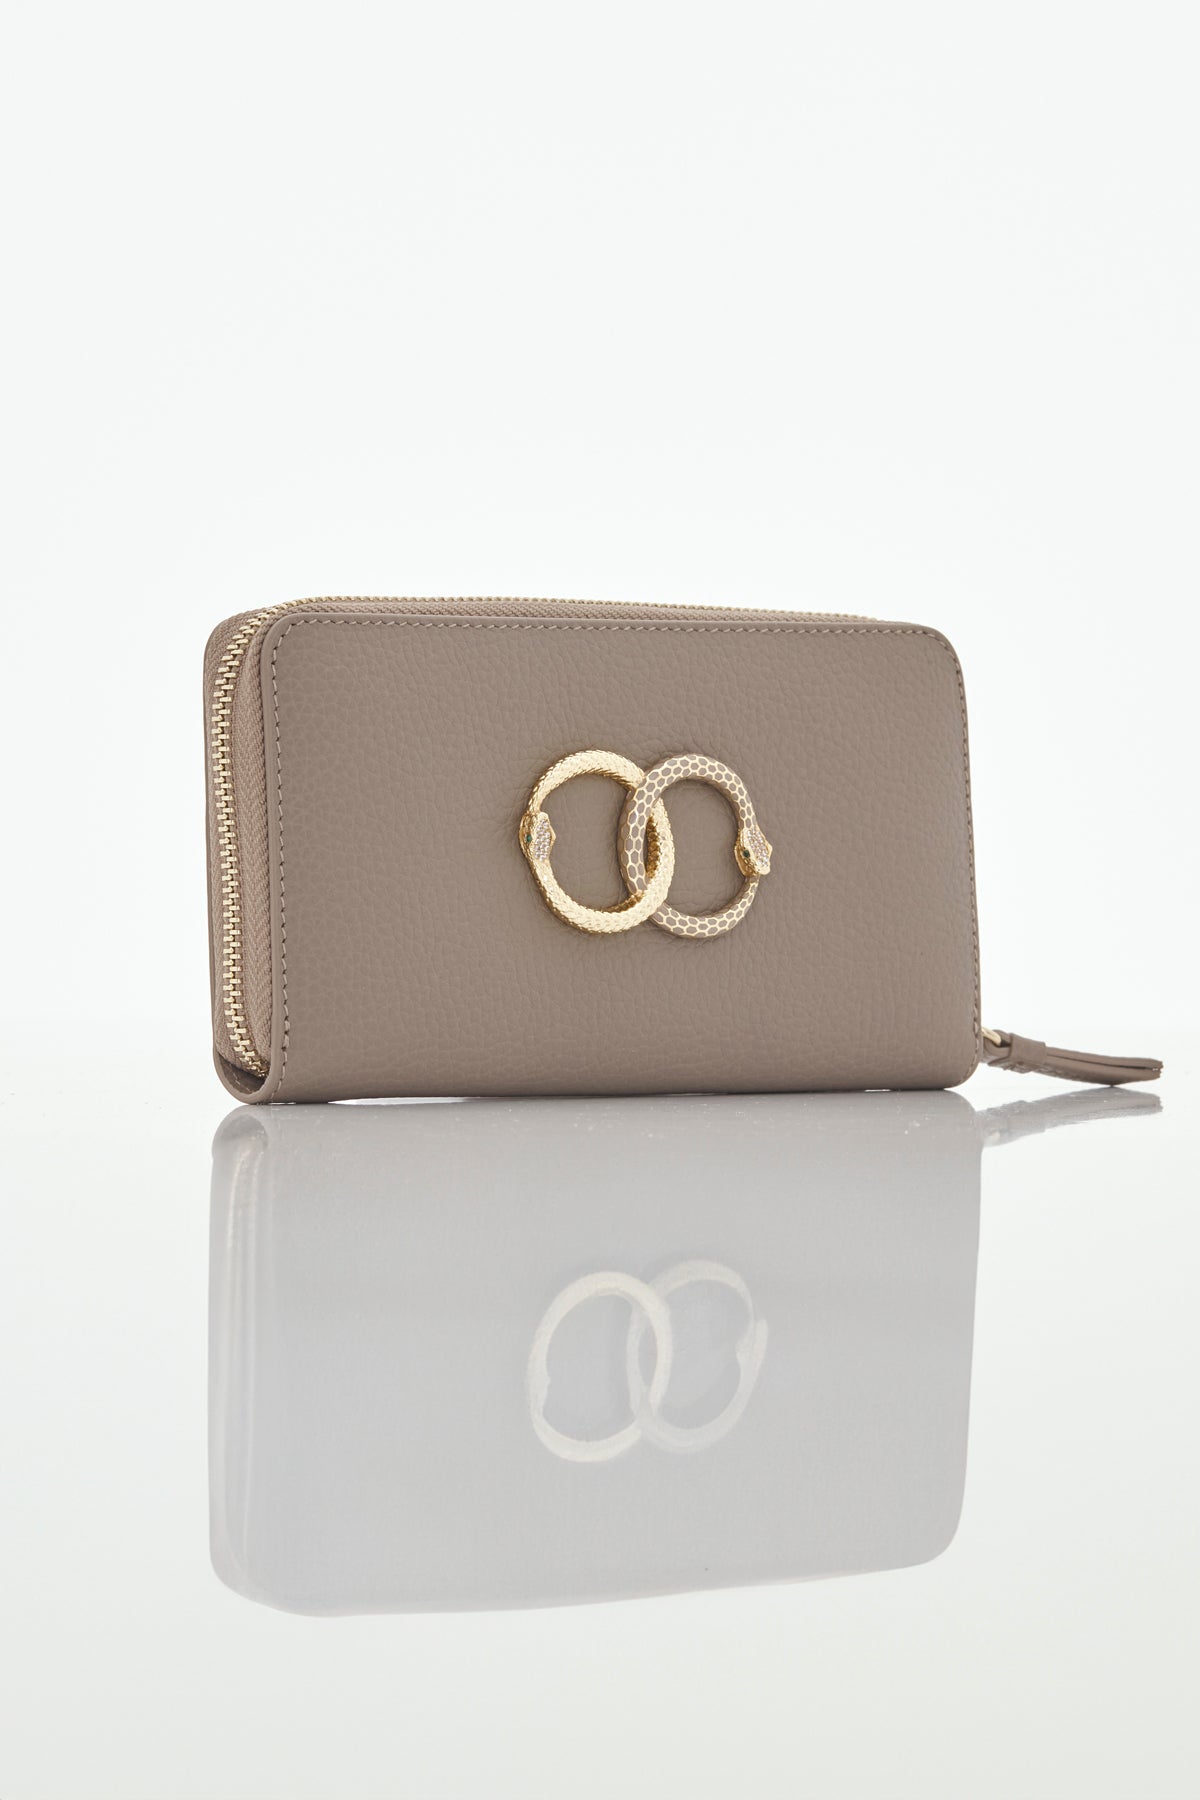 taupe ouroboros genuine leather women's wallet side